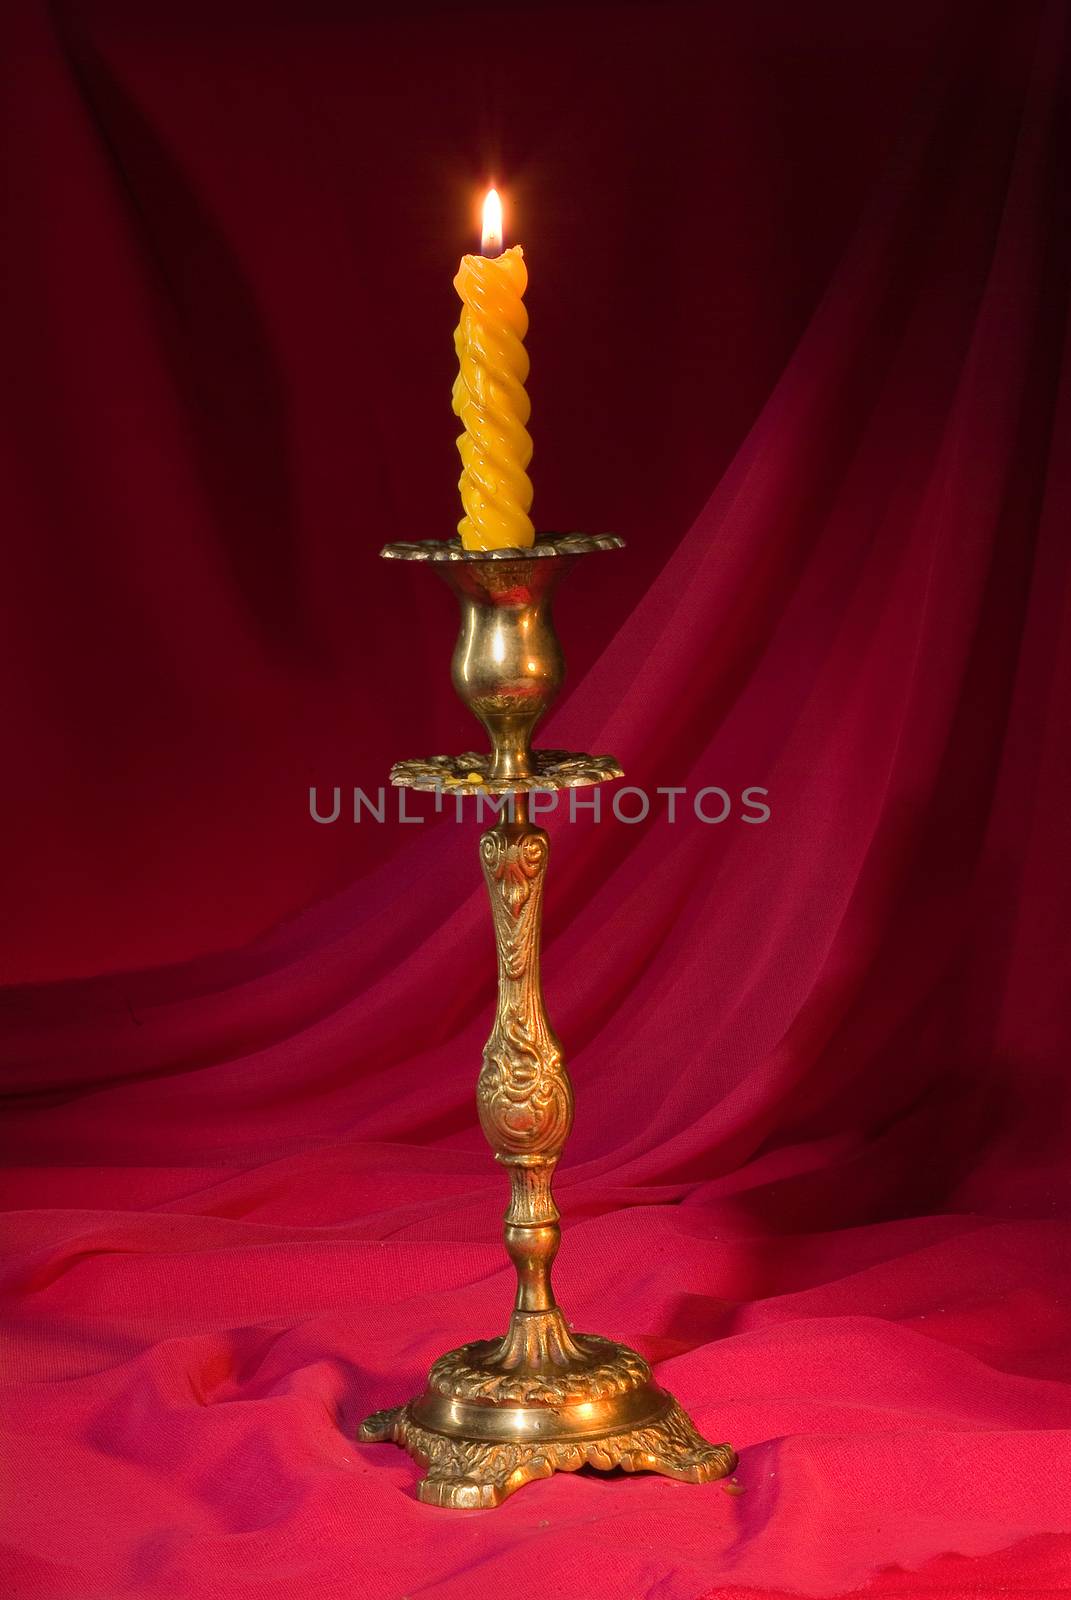 Candle in a stick on a red fabric studio background